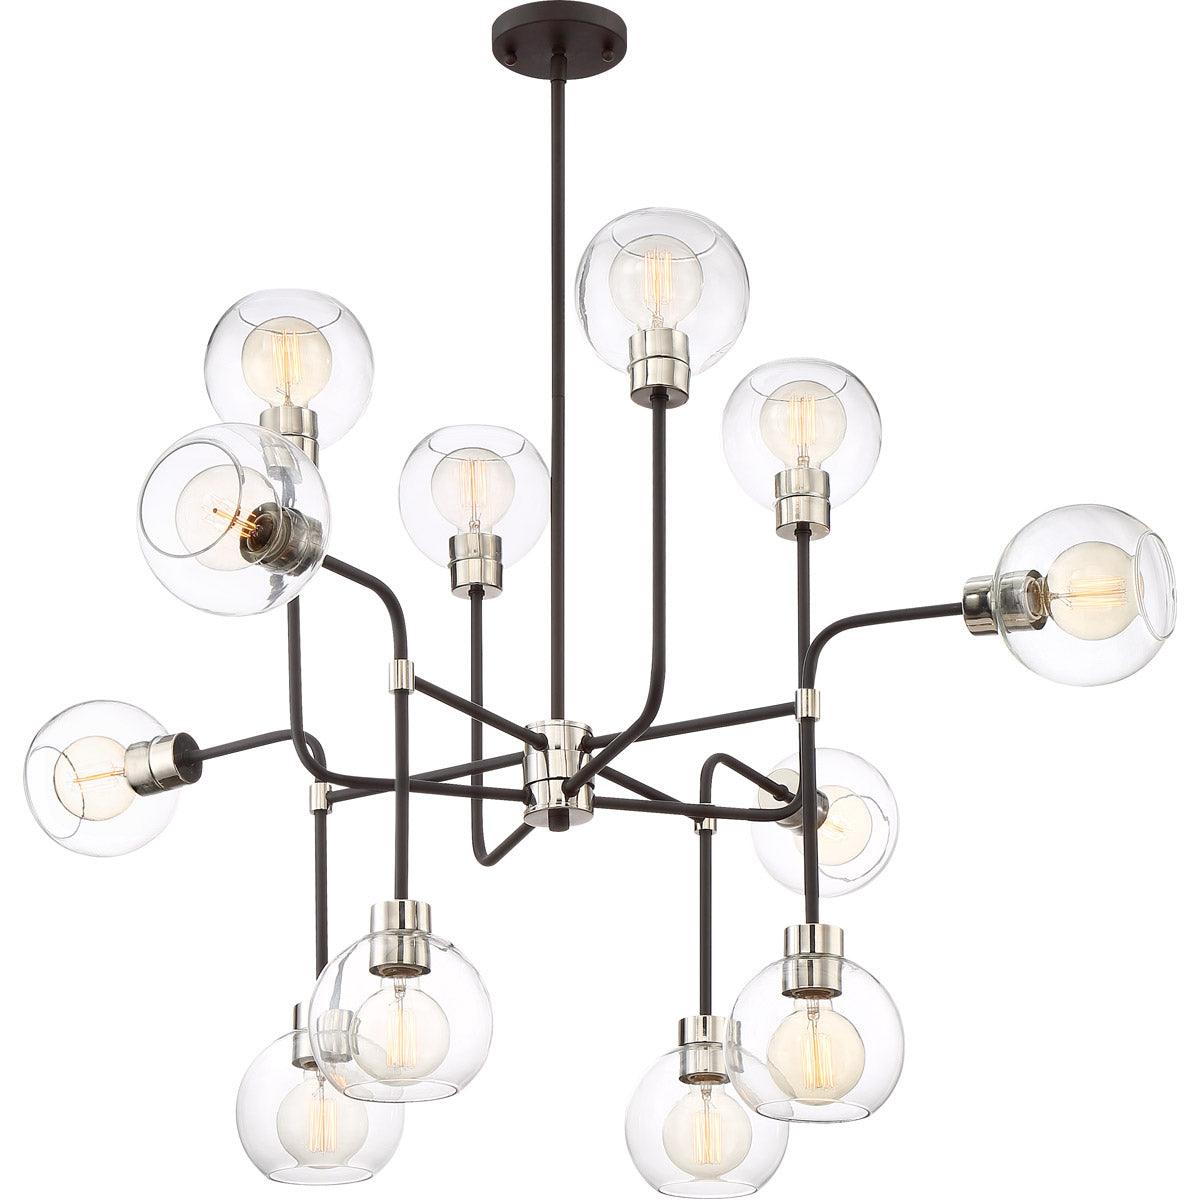 Polished Nickel Frame with Matte Black Arms with Clear Glass Shade Chandelier - LV LIGHTING